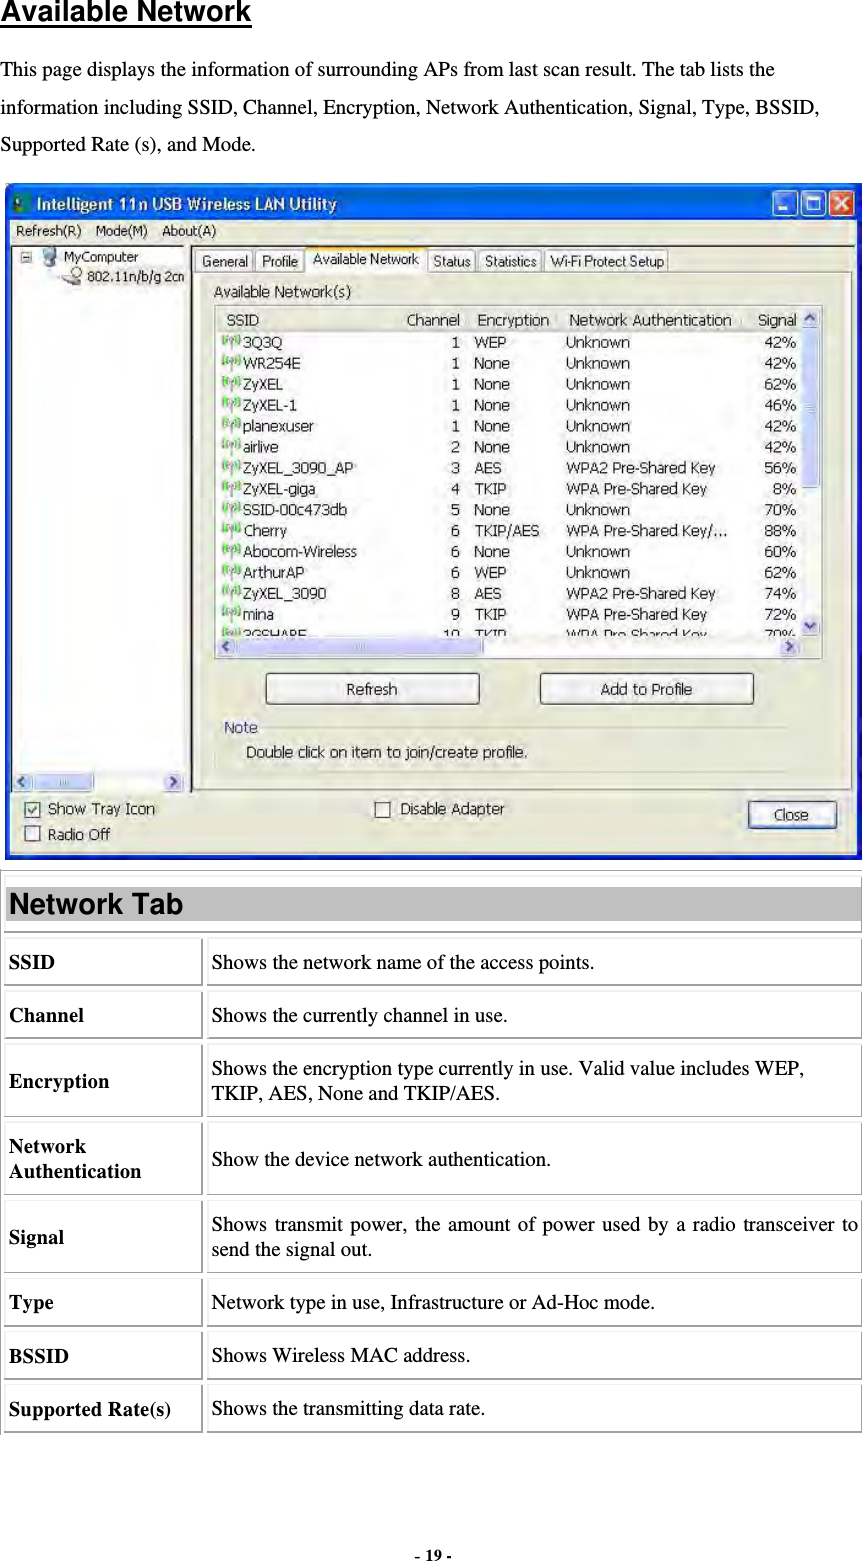  - 19 - Available Network This page displays the information of surrounding APs from last scan result. The tab lists the information including SSID, Channel, Encryption, Network Authentication, Signal, Type, BSSID, Supported Rate (s), and Mode.  Network Tab SSID  Shows the network name of the access points. Channel  Shows the currently channel in use. Encryption  Shows the encryption type currently in use. Valid value includes WEP, TKIP, AES, None and TKIP/AES. Network Authentication  Show the device network authentication. Signal  Shows transmit power, the amount of power used by a radio transceiver to send the signal out. Type Network type in use, Infrastructure or Ad-Hoc mode. BSSID  Shows Wireless MAC address. Supported Rate(s)  Shows the transmitting data rate. 